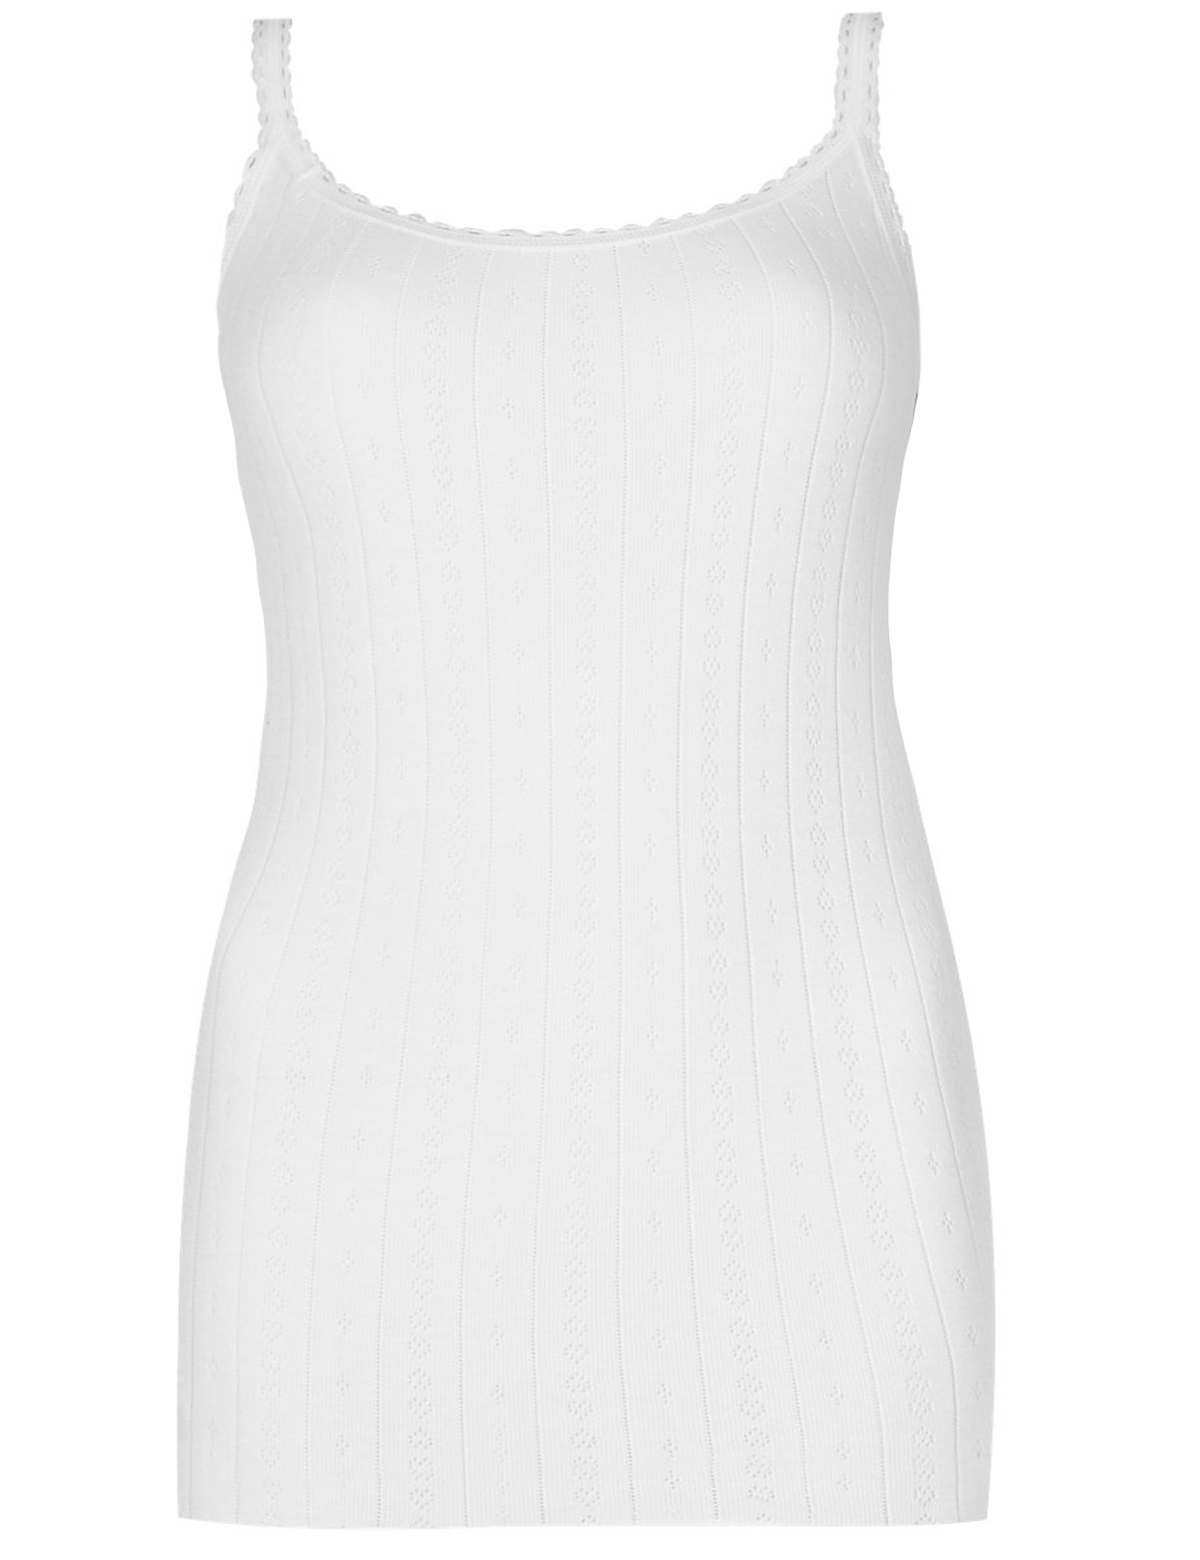 Marks and Spencer - - M&5 WHITE Thermal Pointelle Strappy Vest - Size 6 ...